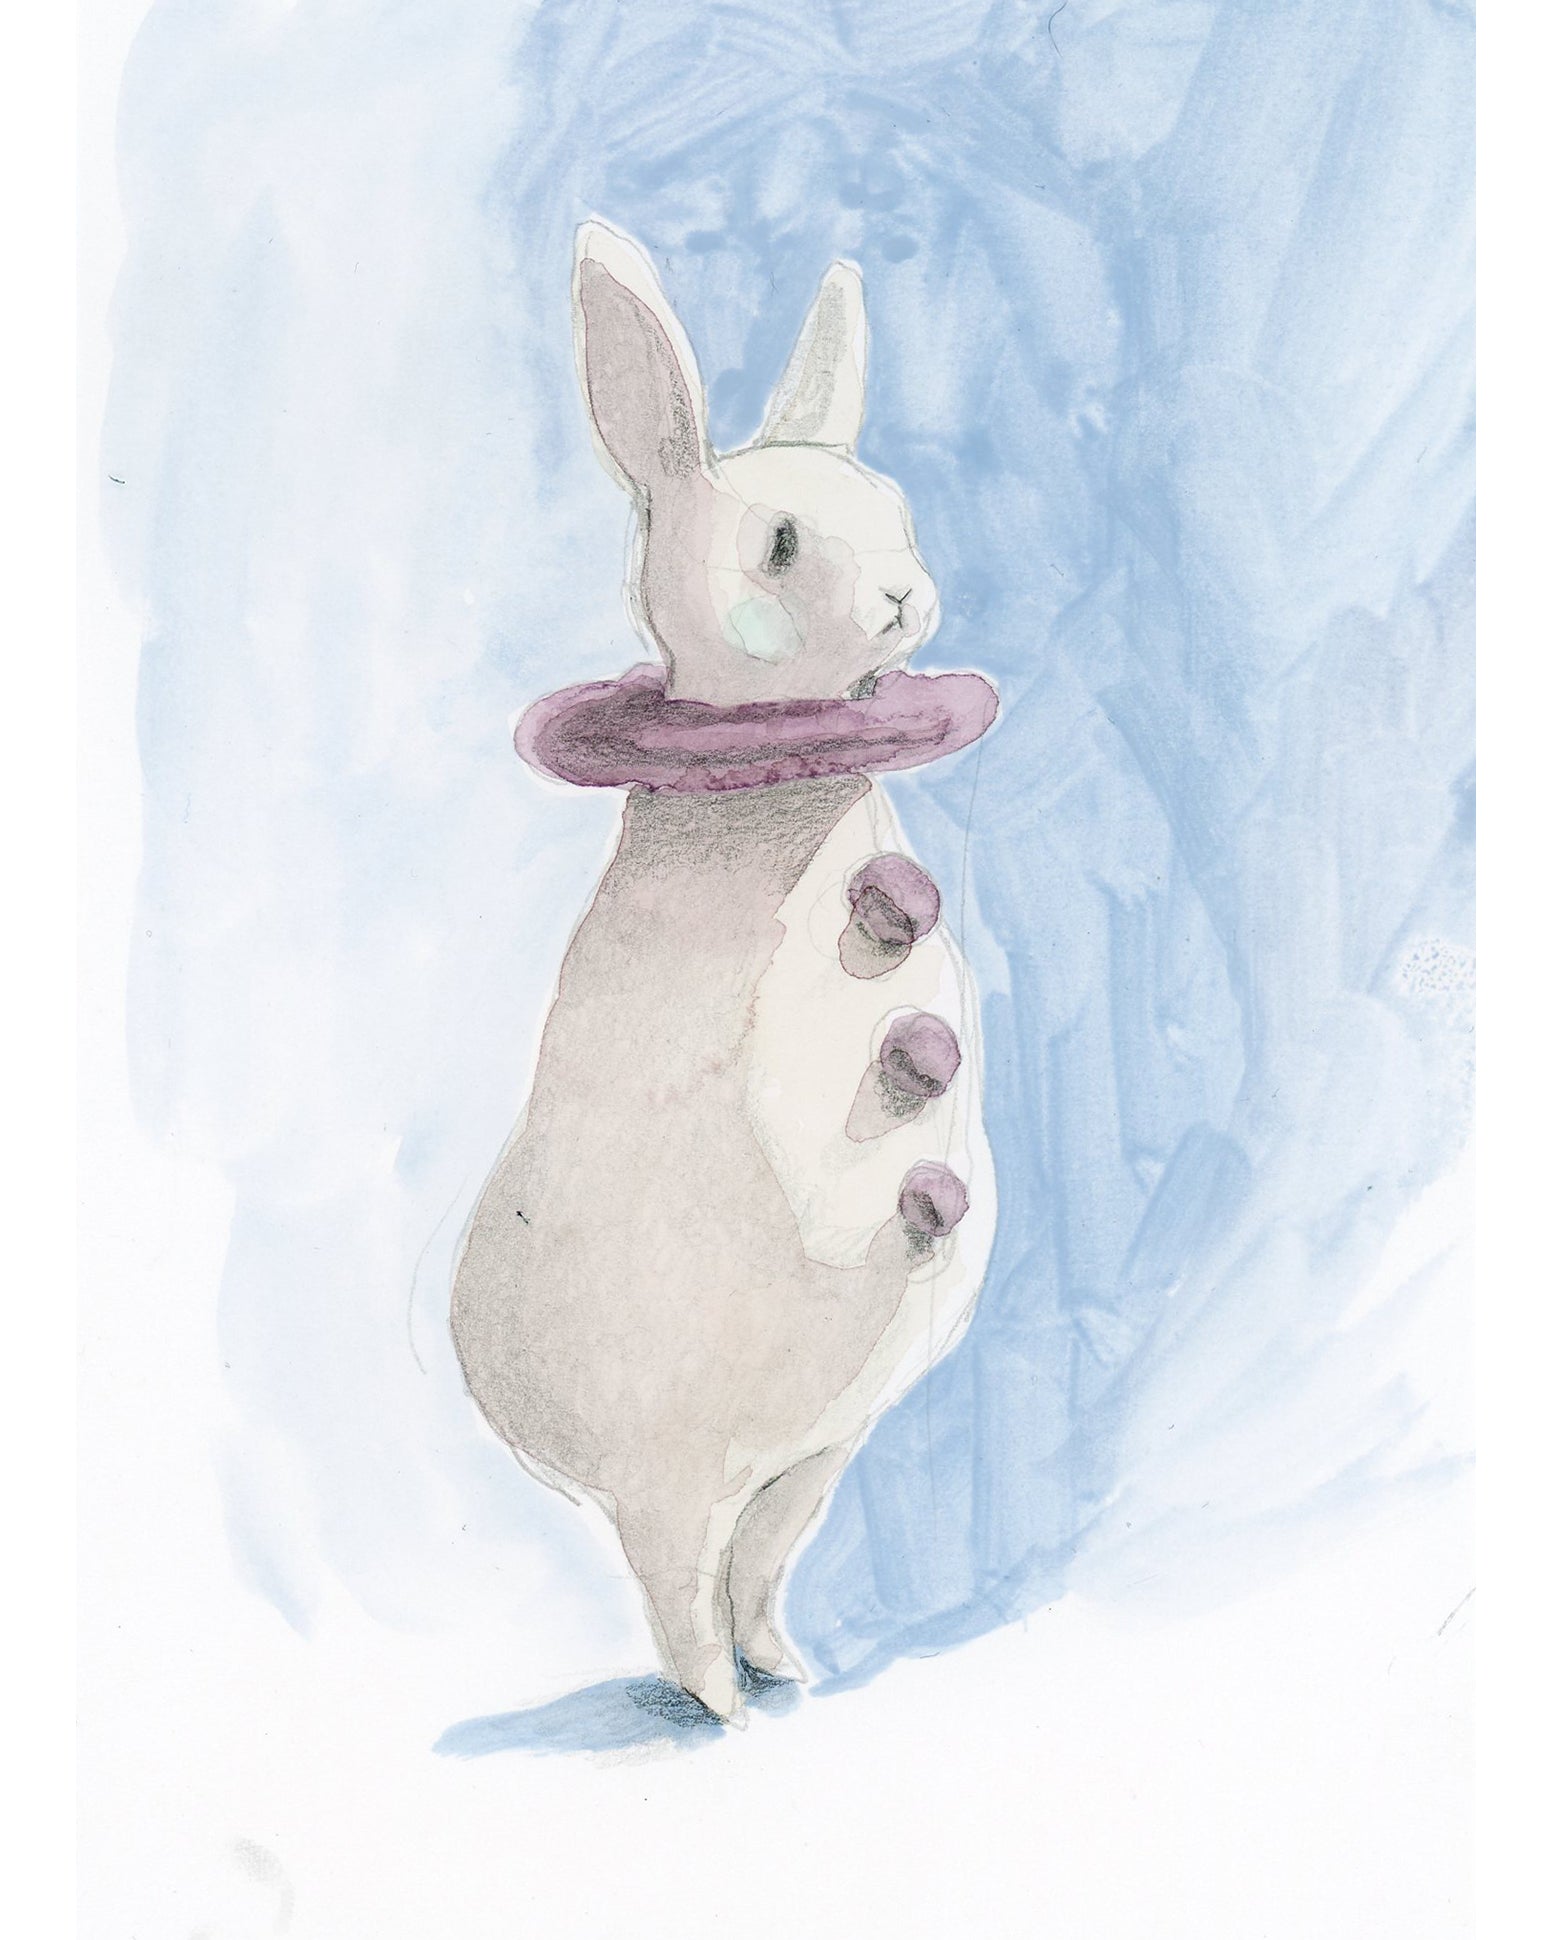 Drawing #137: Lavender Mint Bunny Pierrot [Watercolor and Graphite on Hot Press Watercolor Paper, 5 x 7 inches]